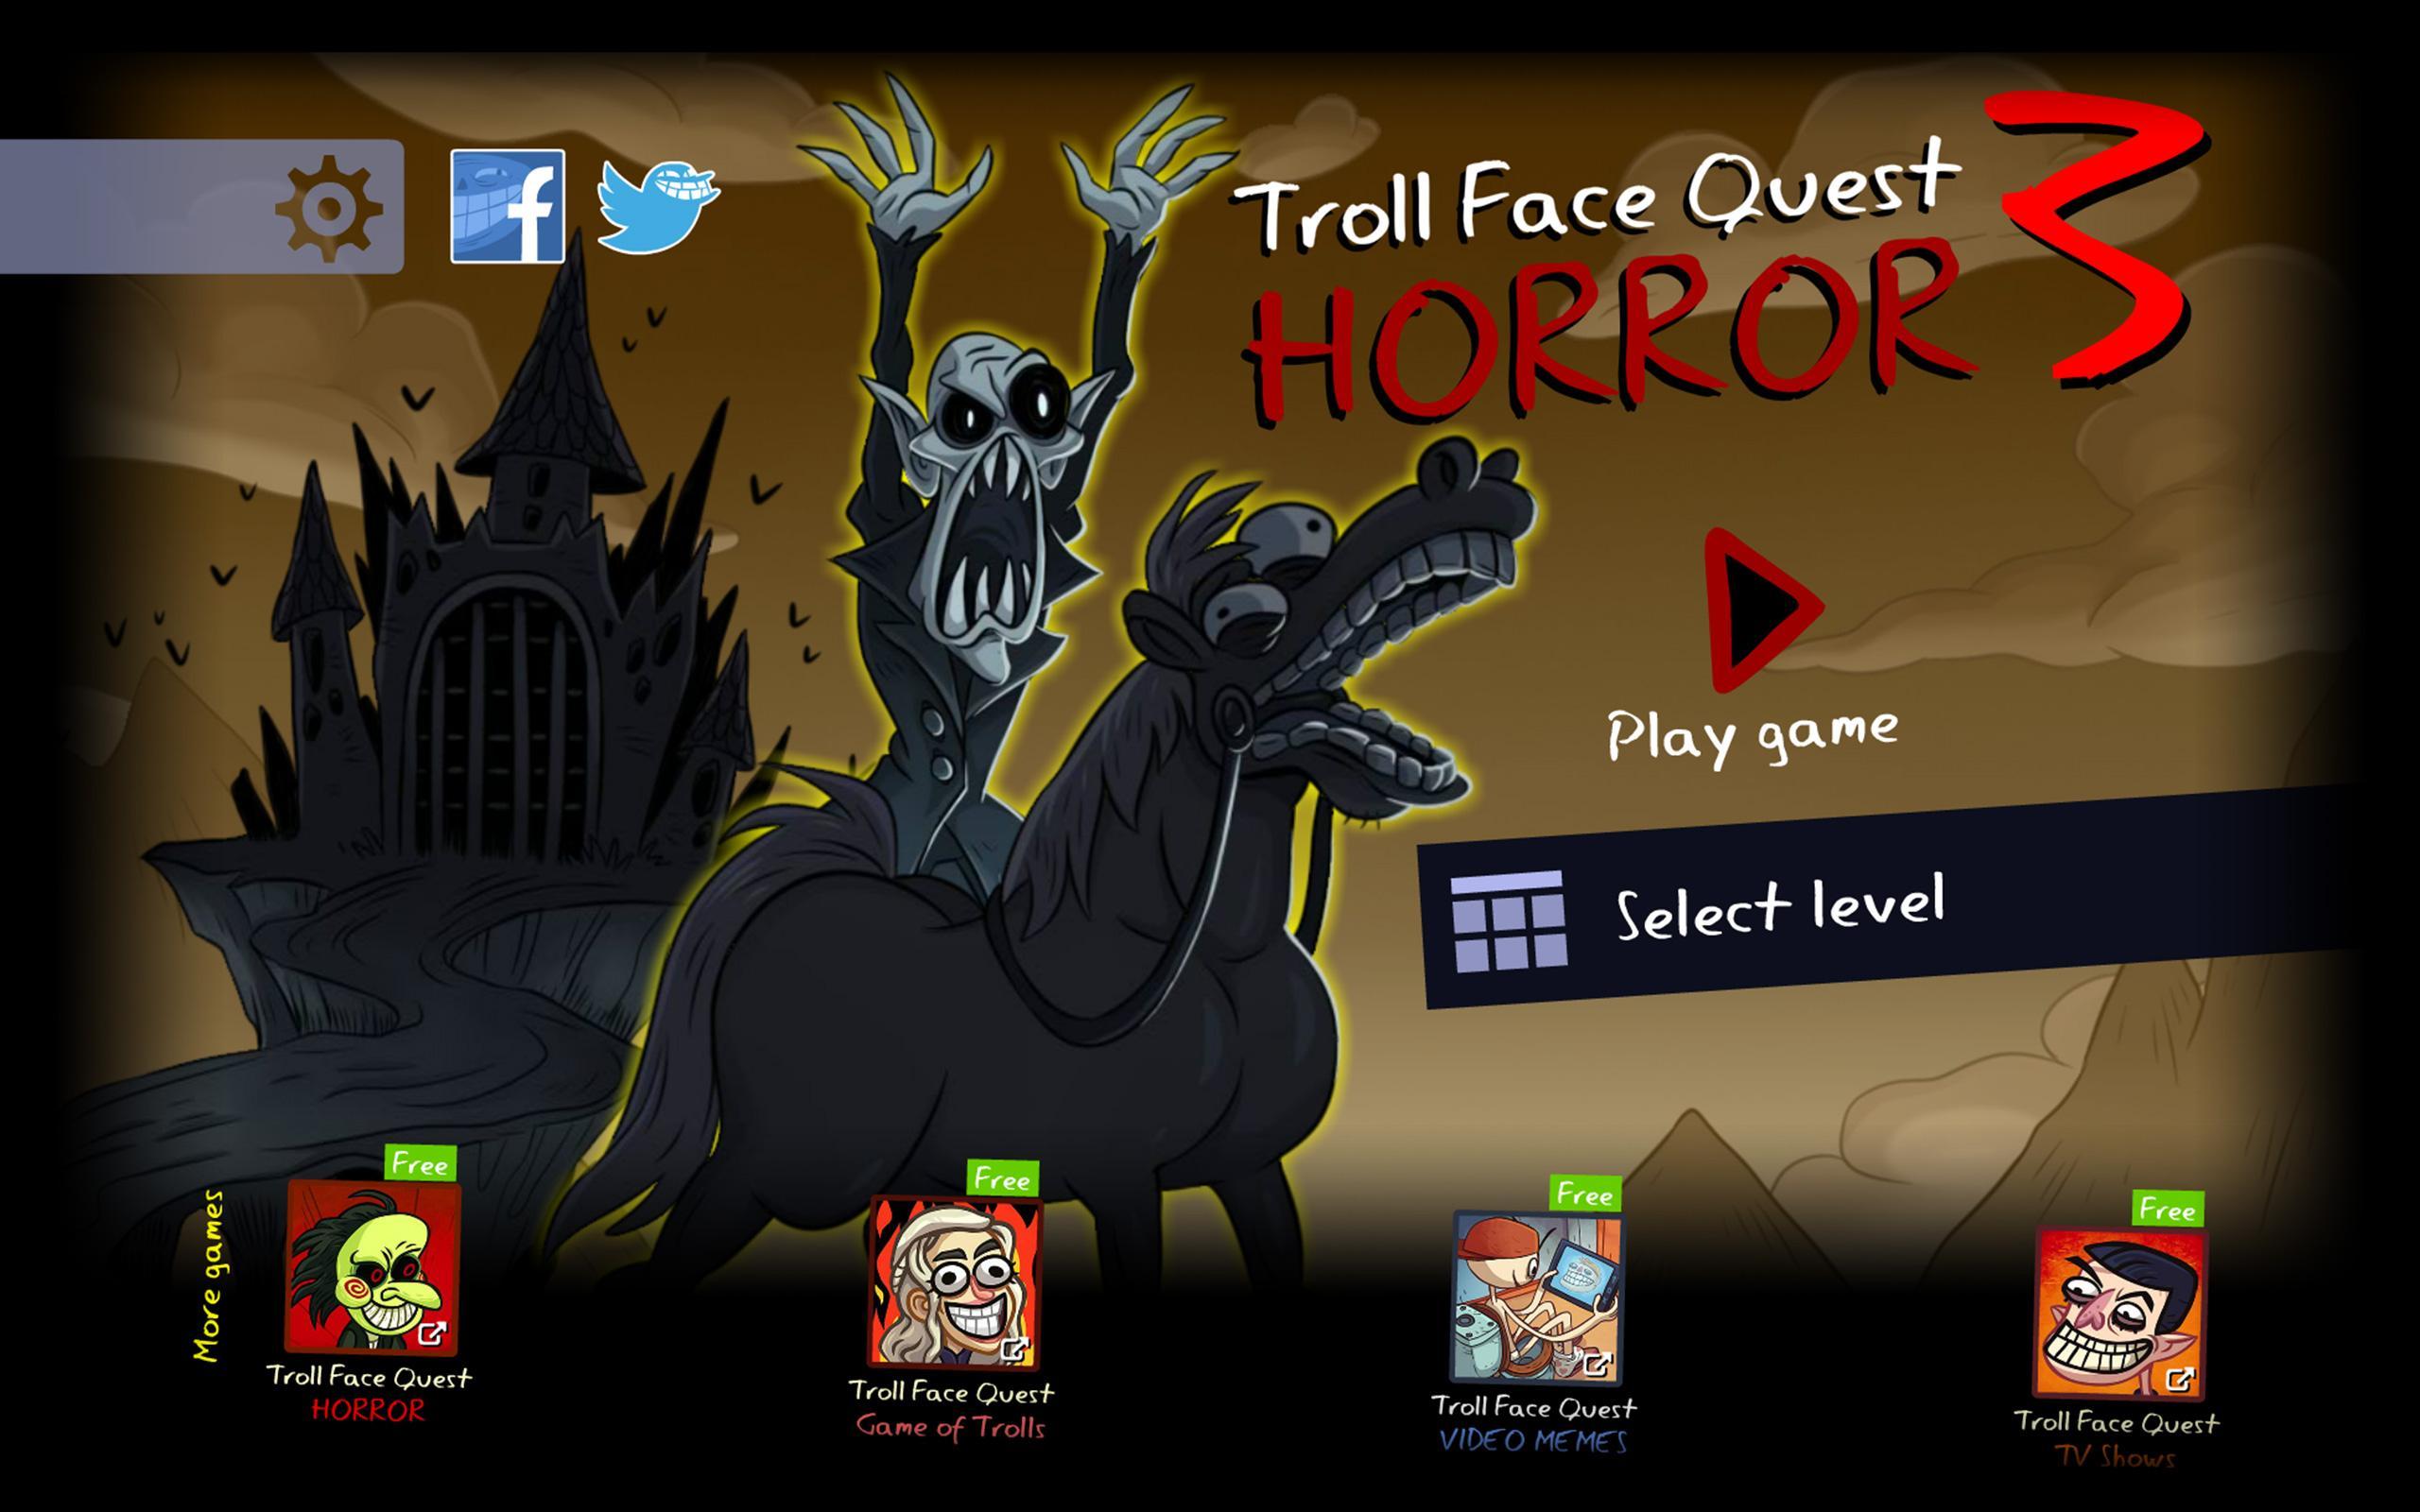 Troll Face Quest Horror 3 For Android Apk Download